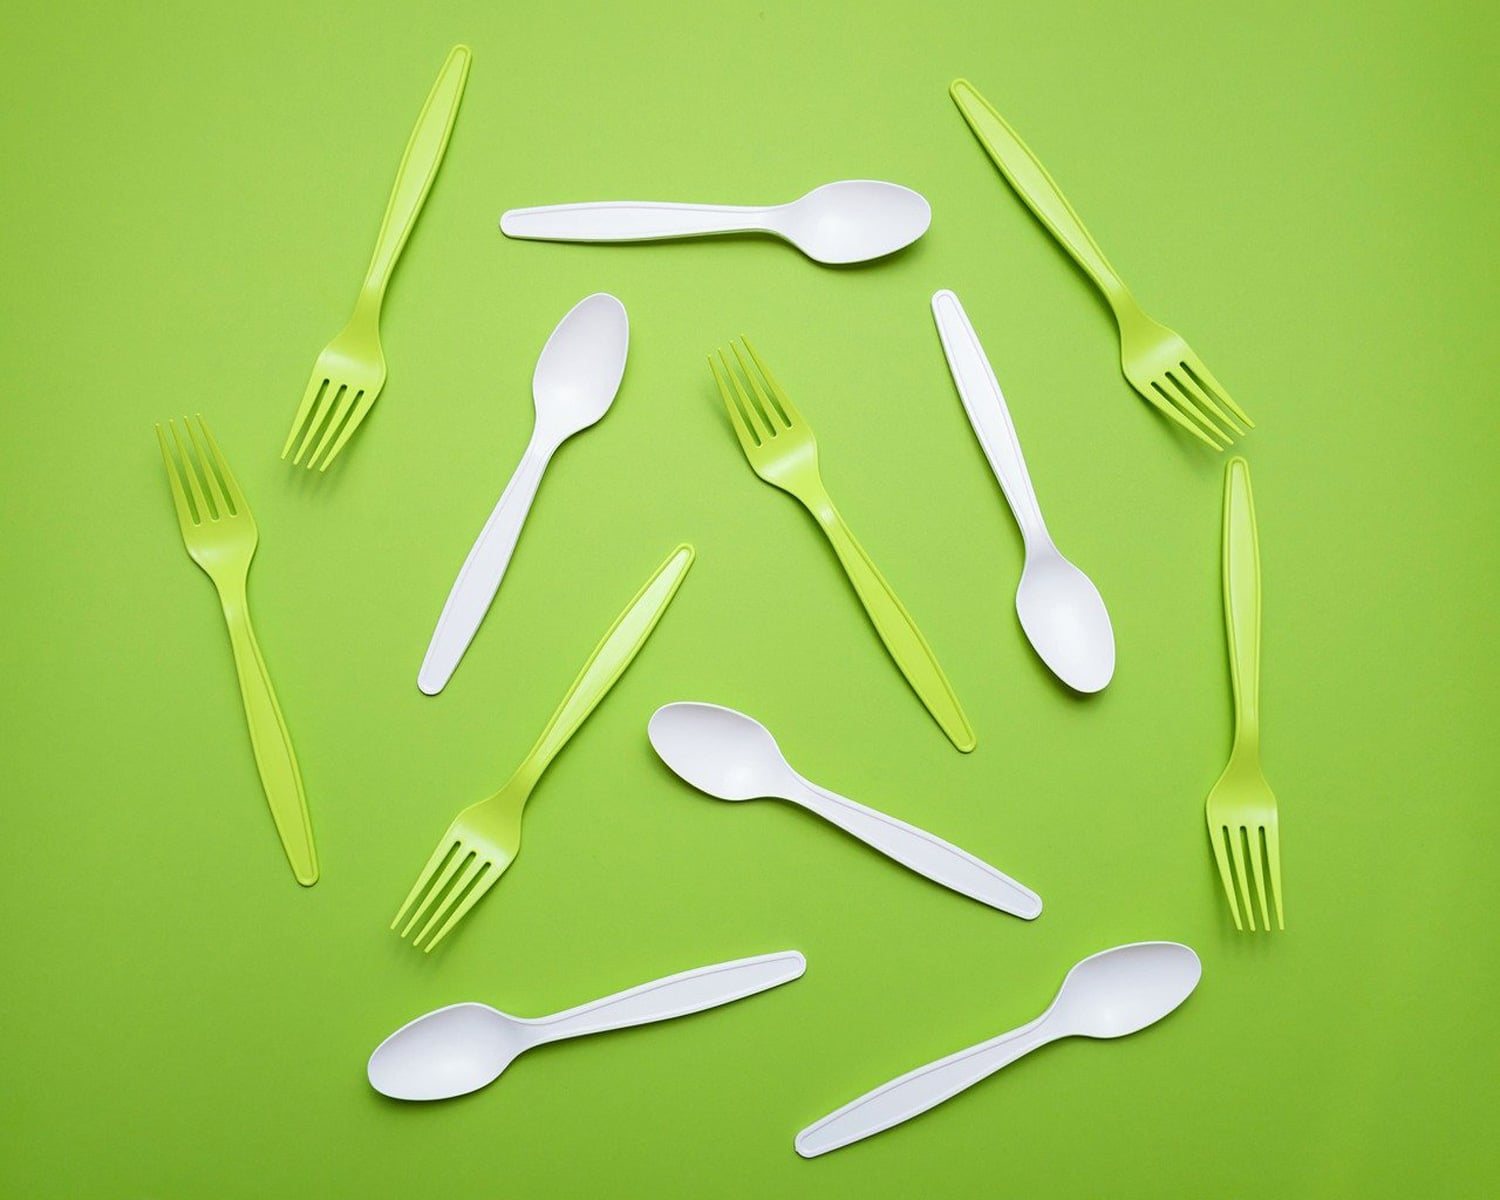 Image showing plastic cutlery